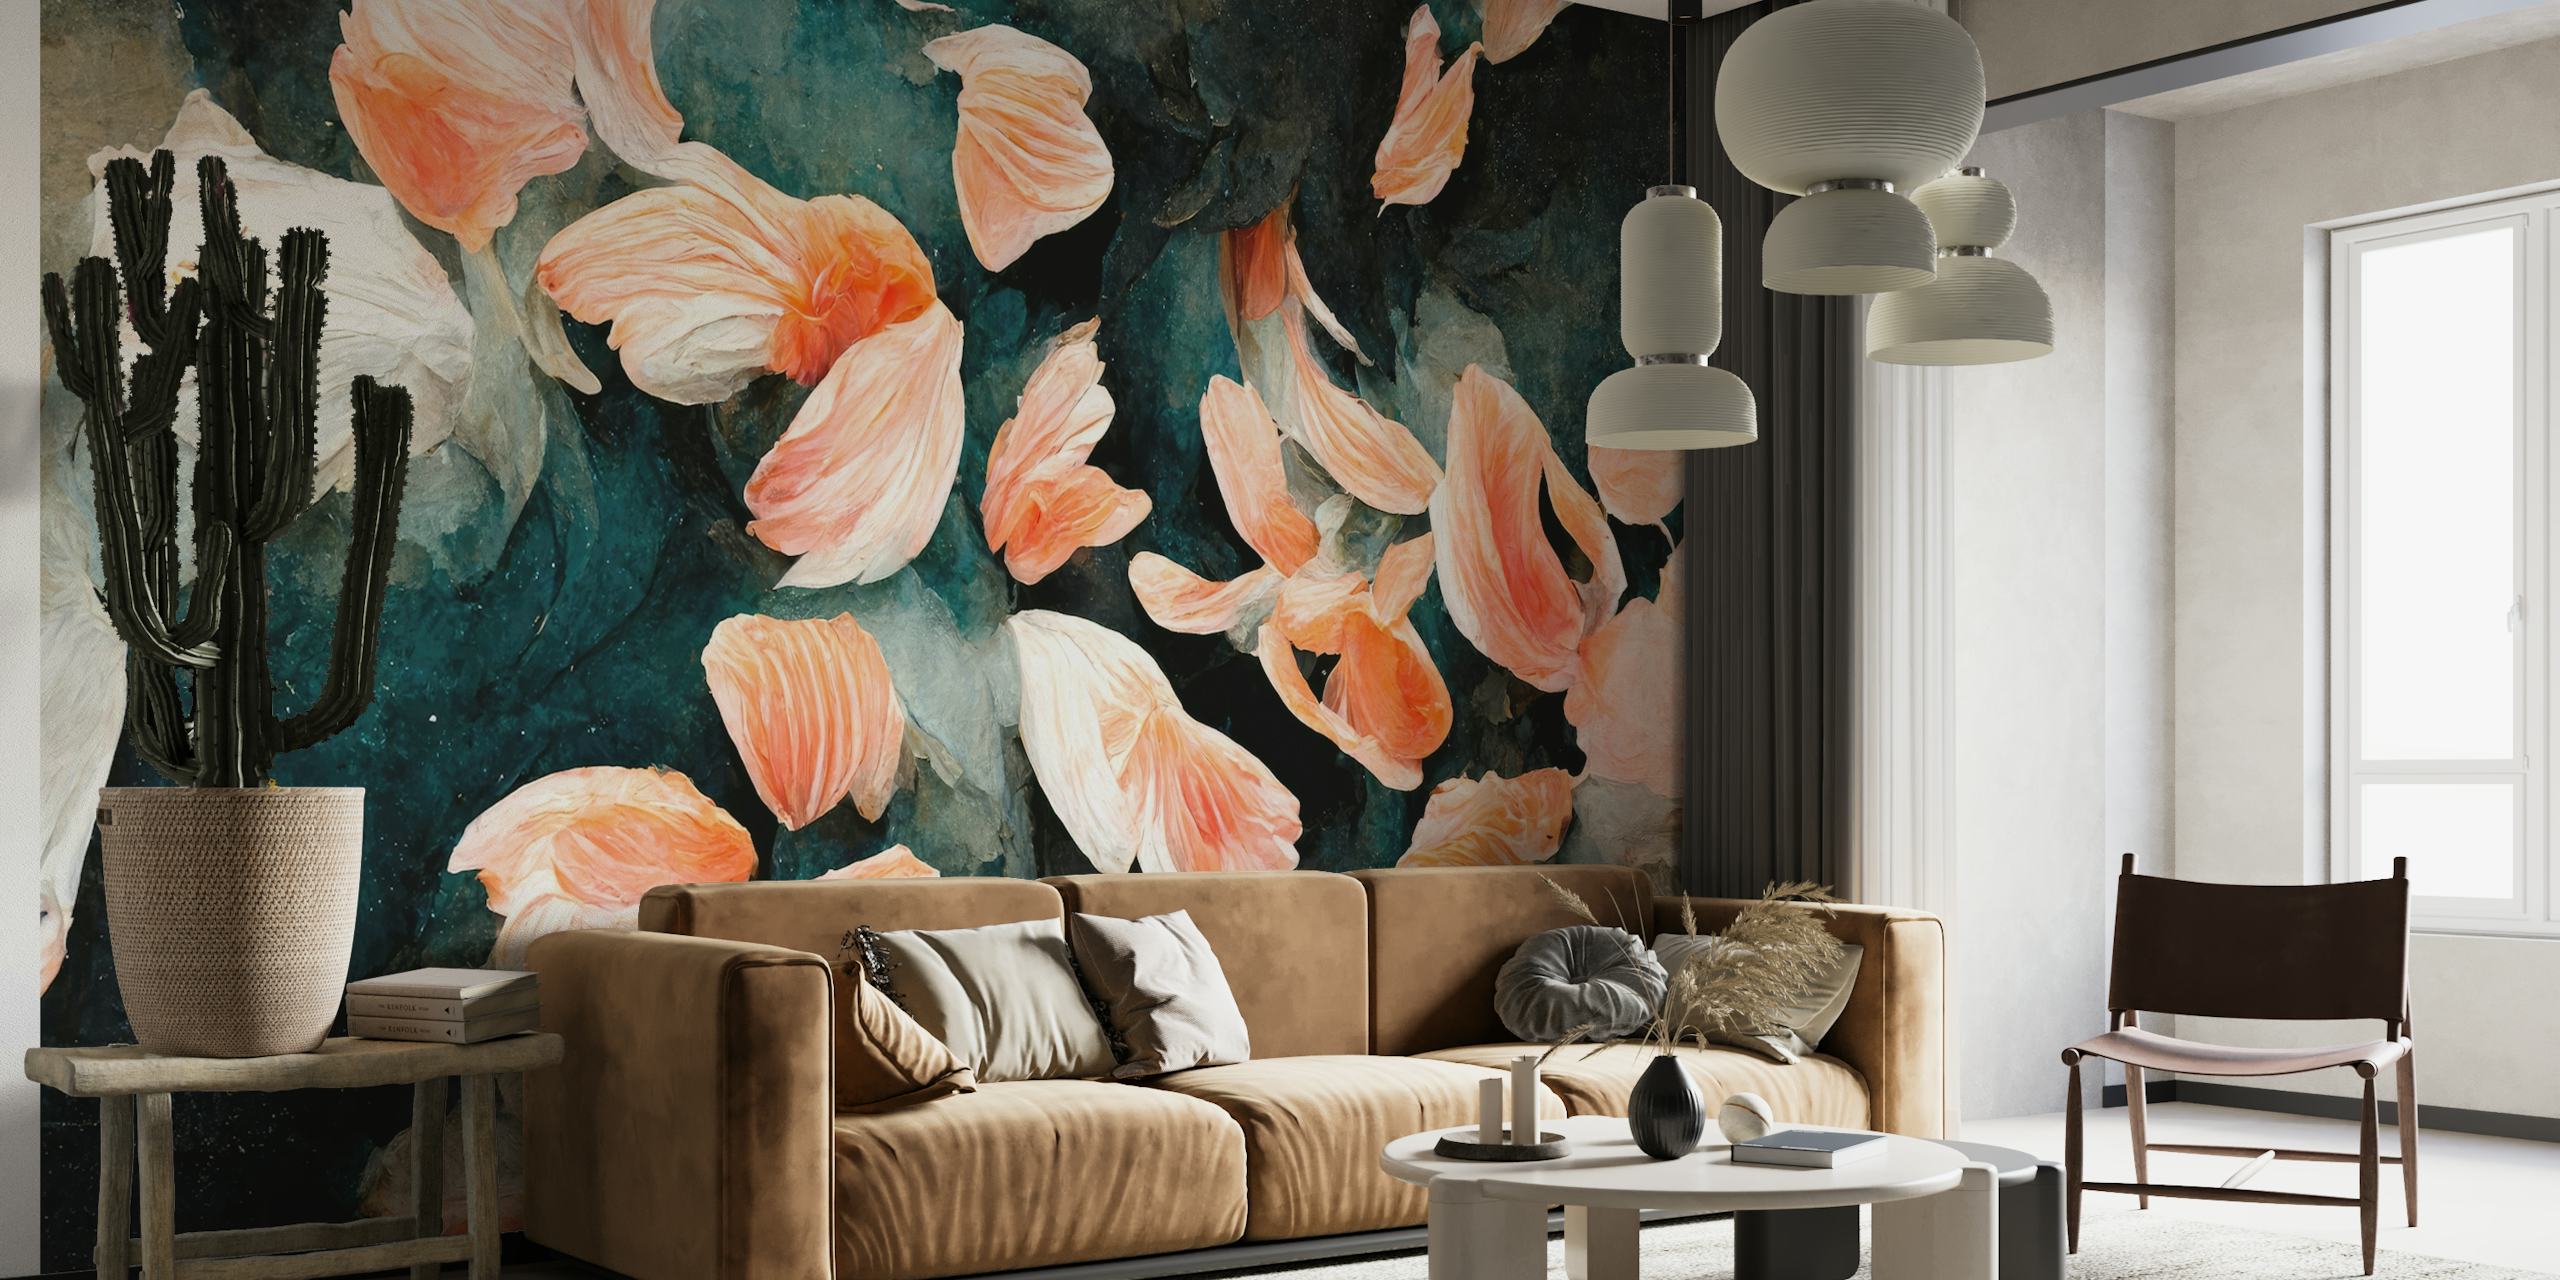 Salmon-pink petals wall mural with dark background